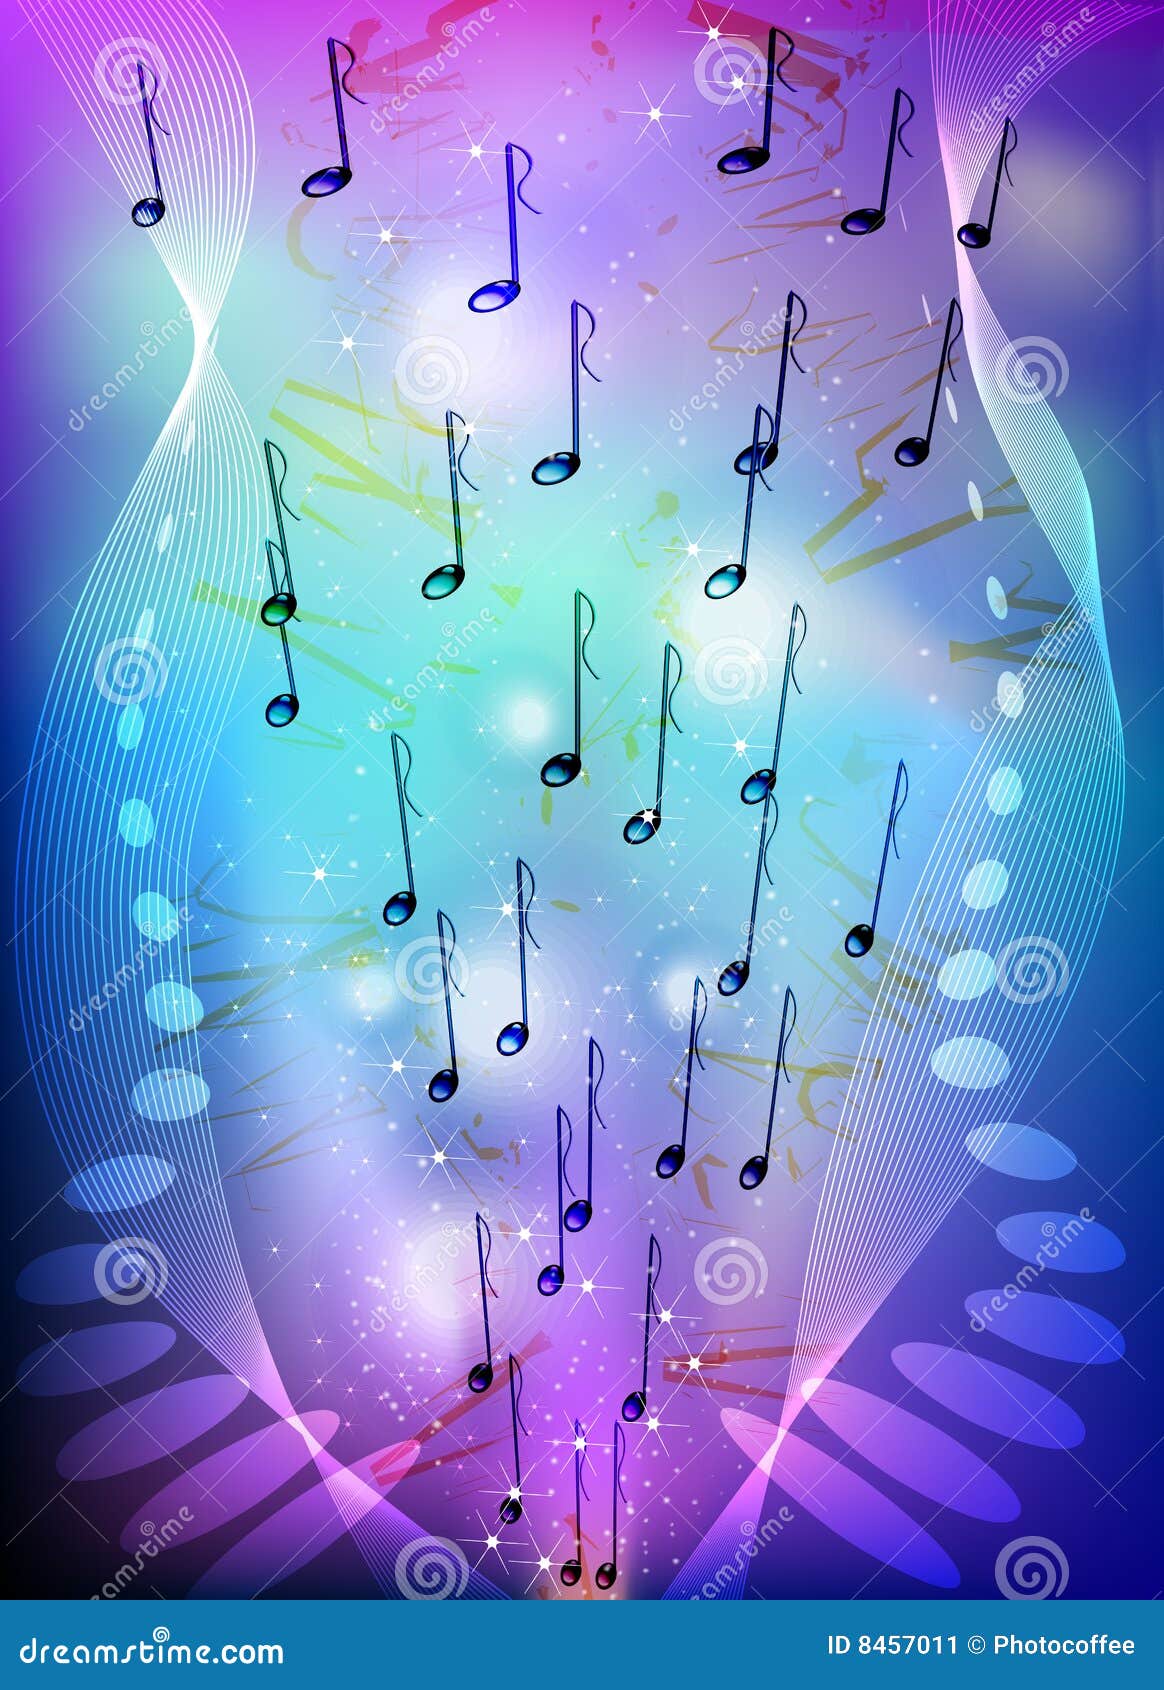 Bright Music Theme Elements Background Vectorvector Backgroundfree Vector  Free Download